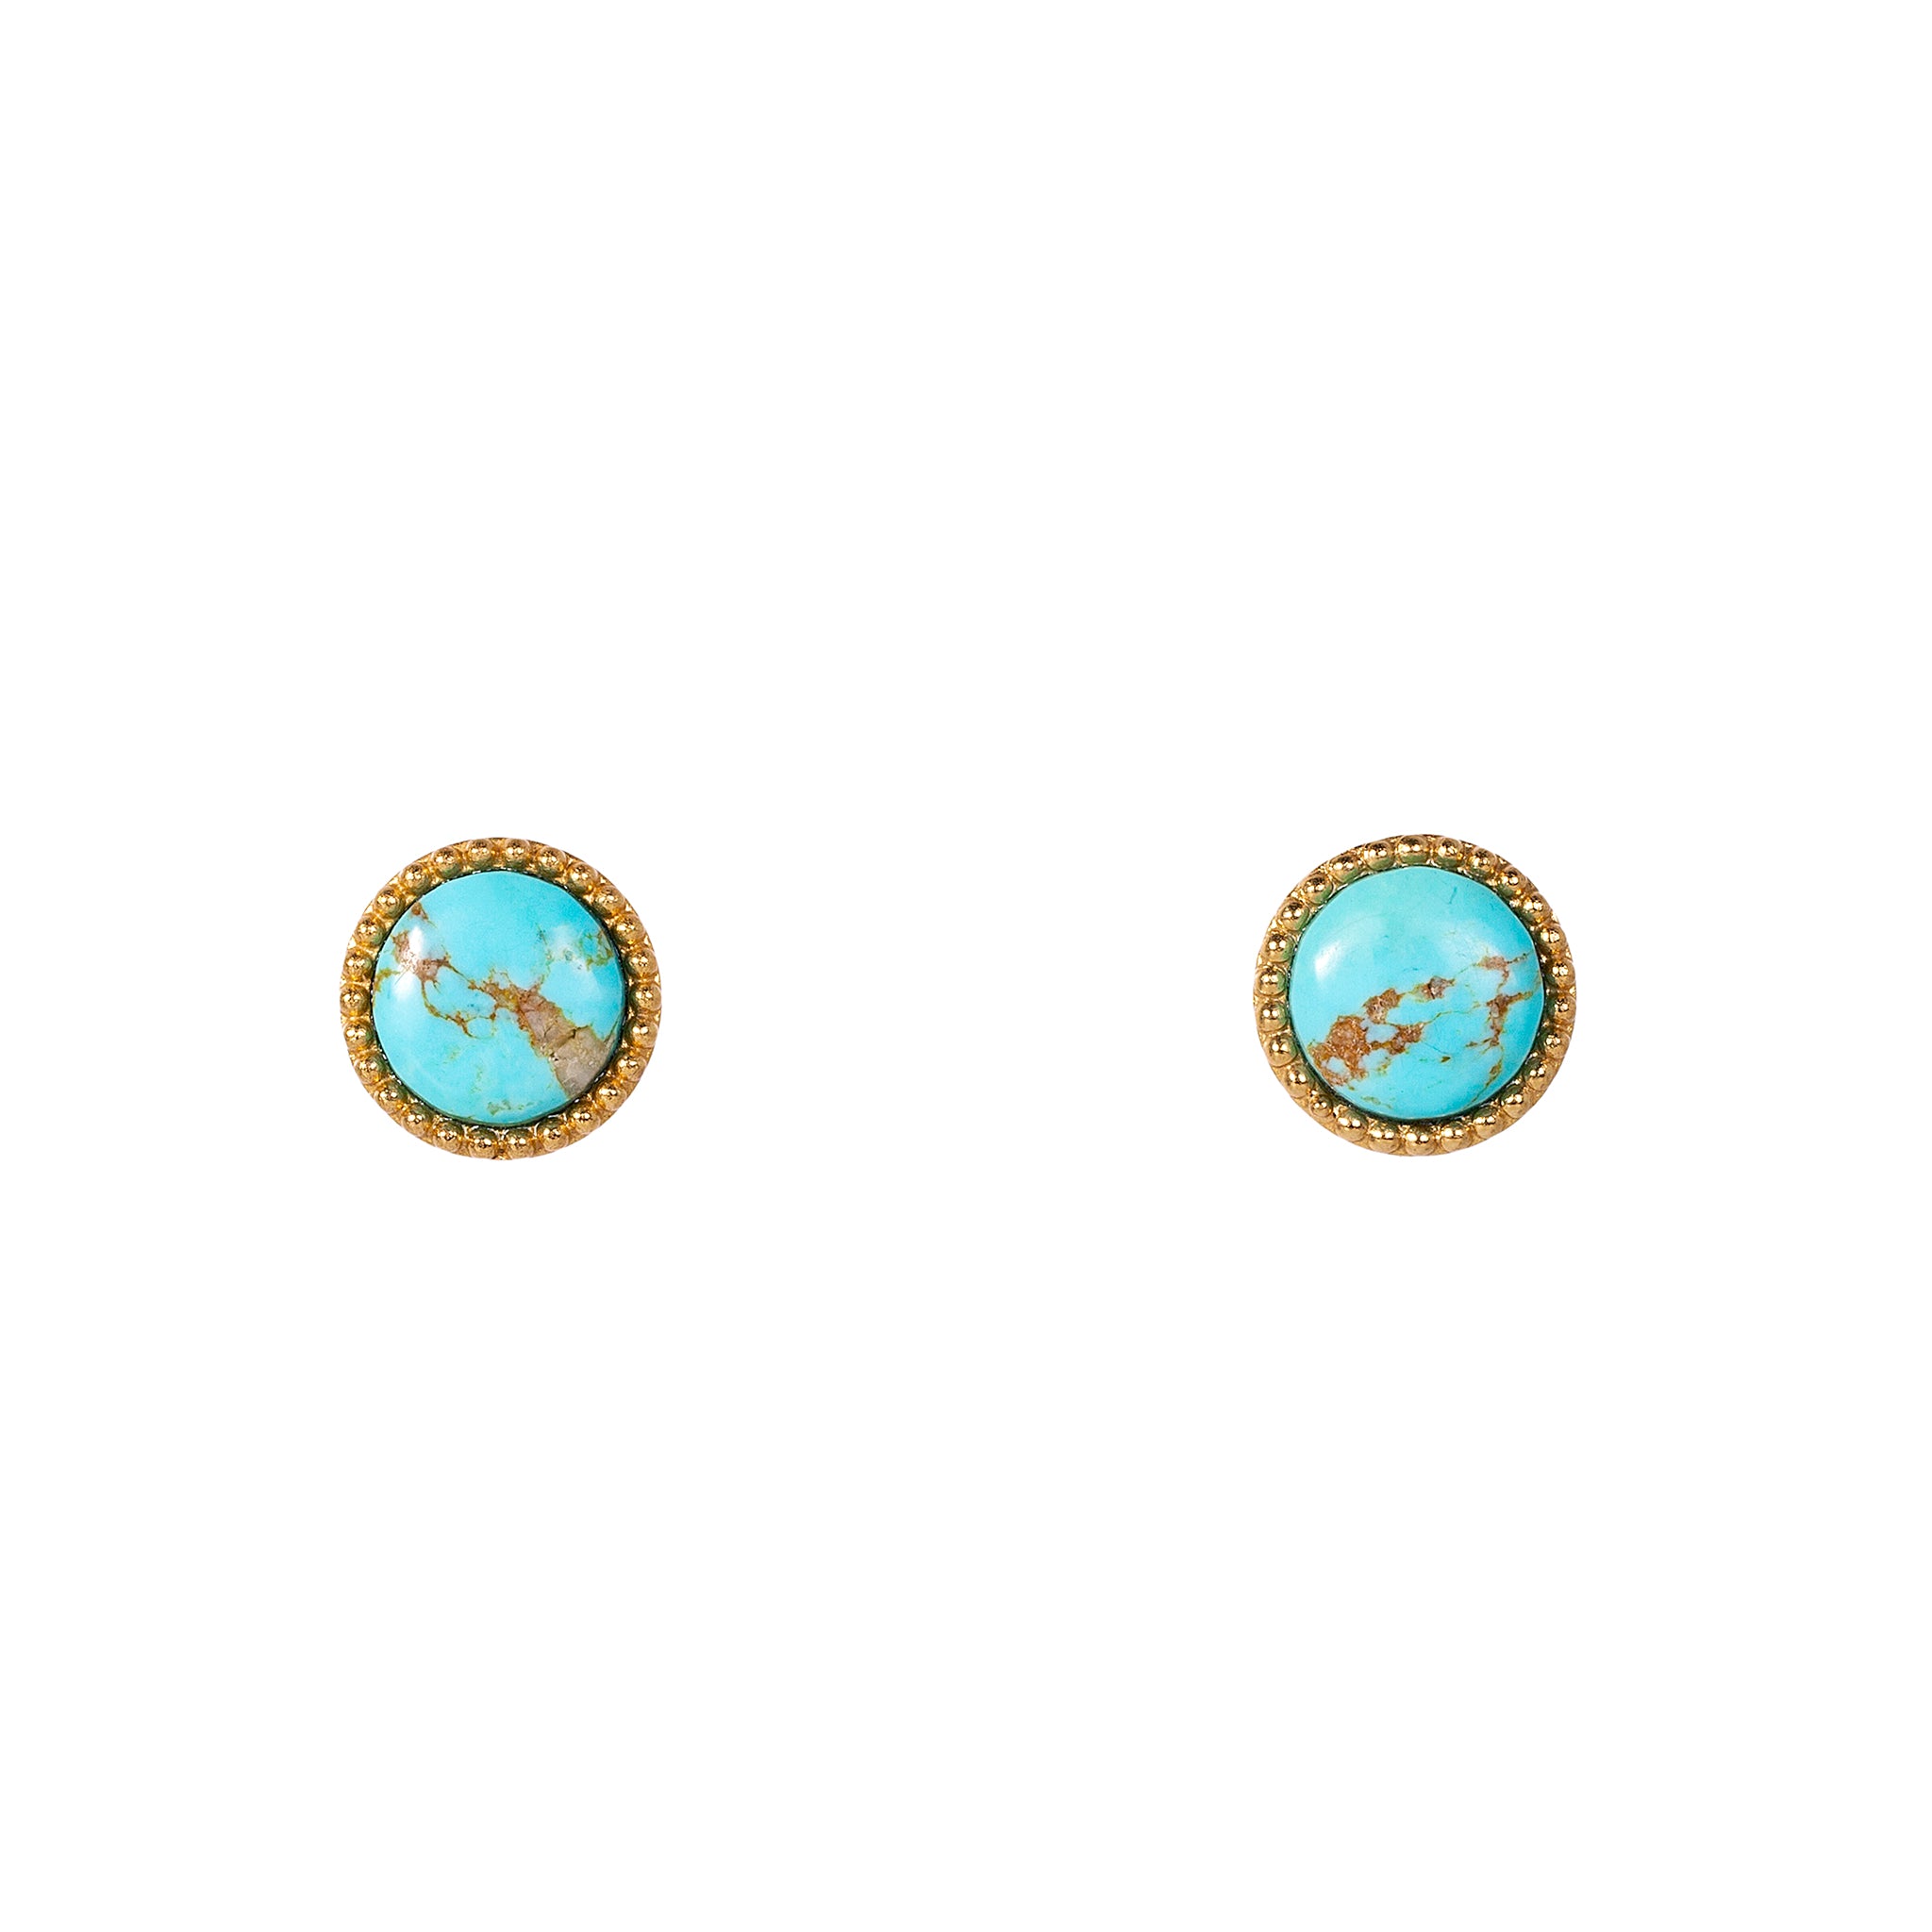 Stud Earrings For Women | Turquoise and Gold Earrings | Christina ...